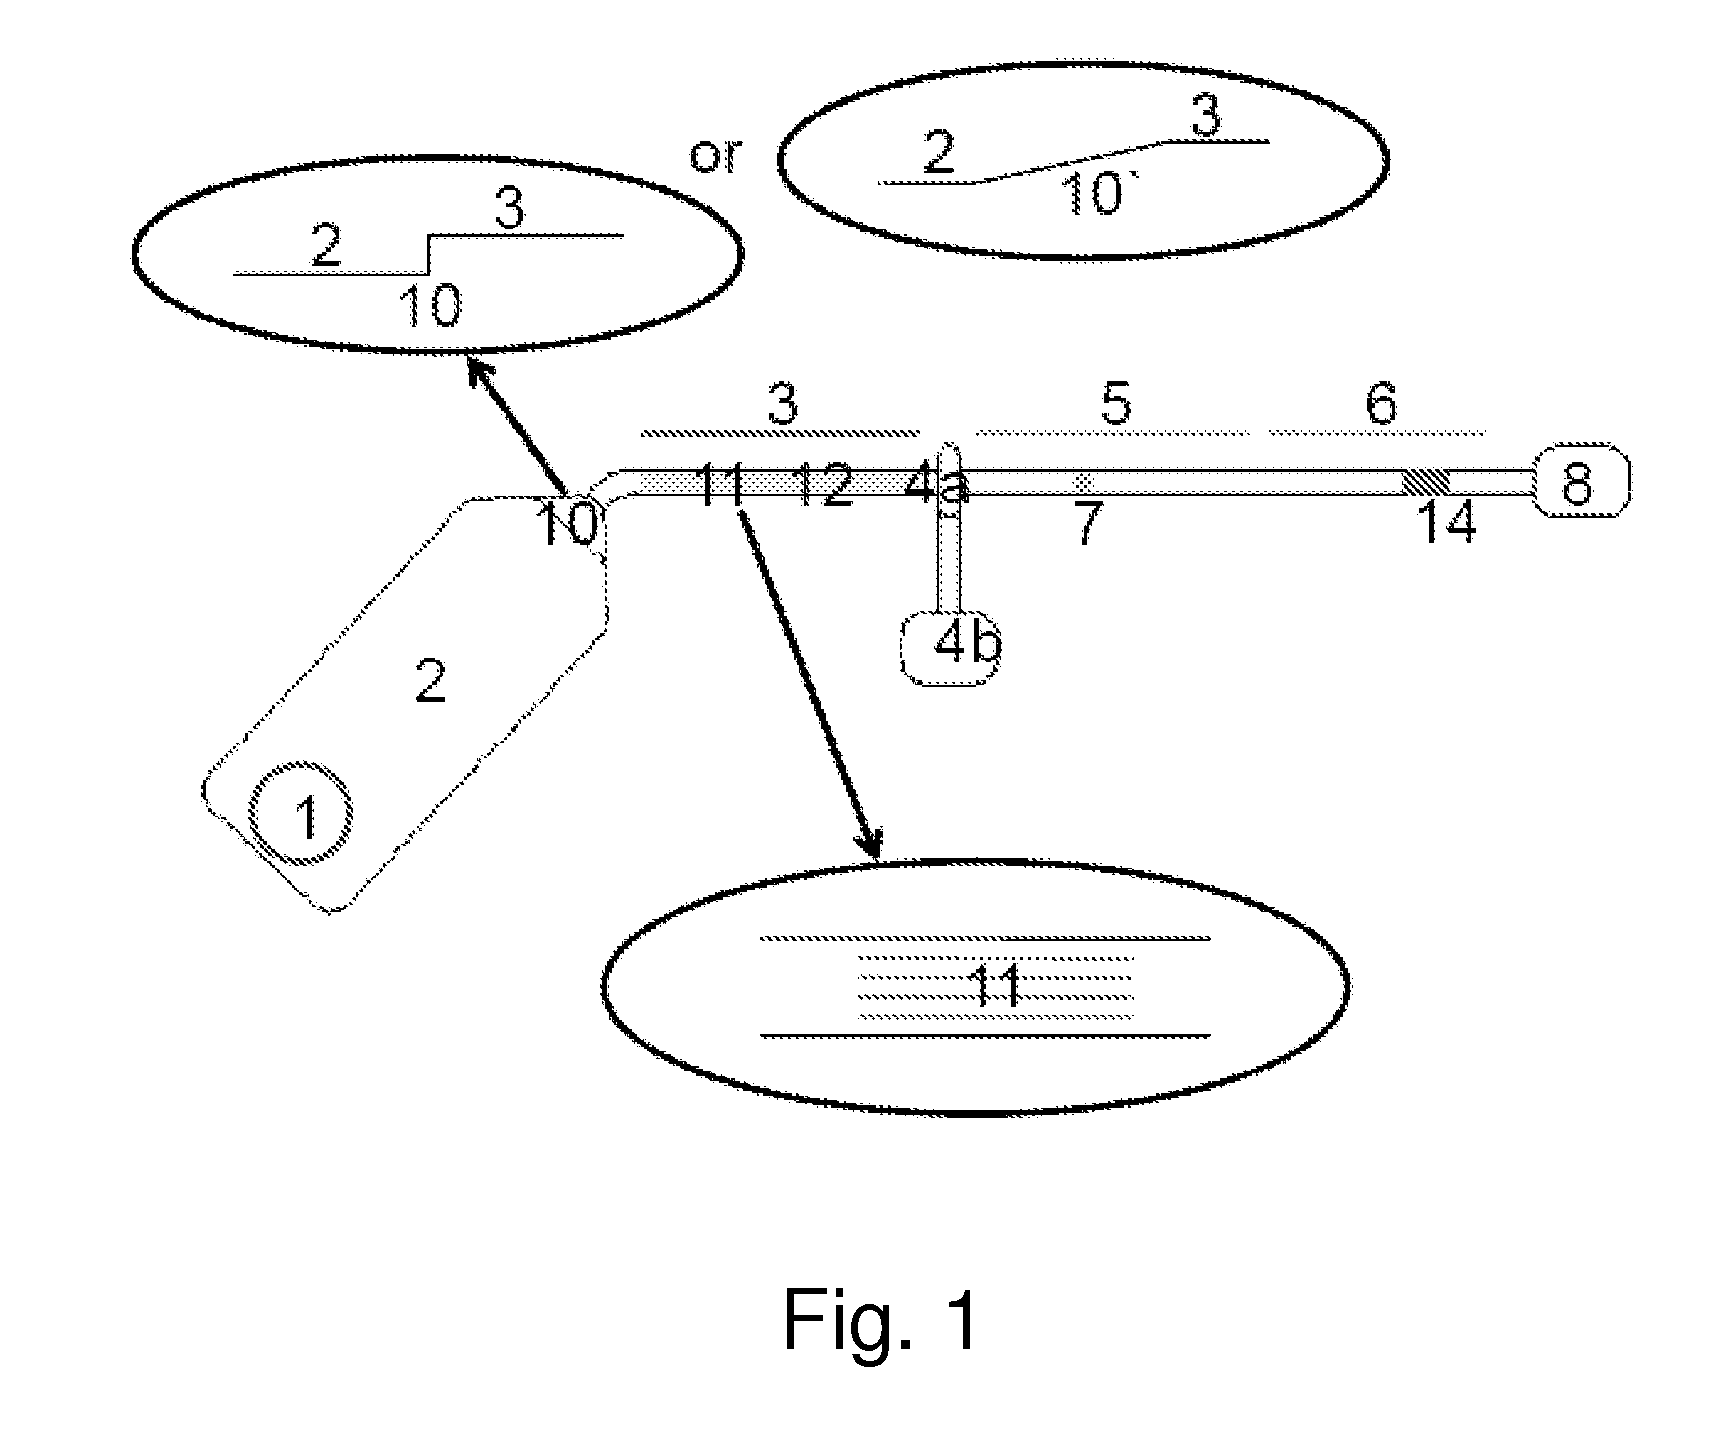 Integrated separation and detection cartridge with means and method for increasing signal to noise ratio